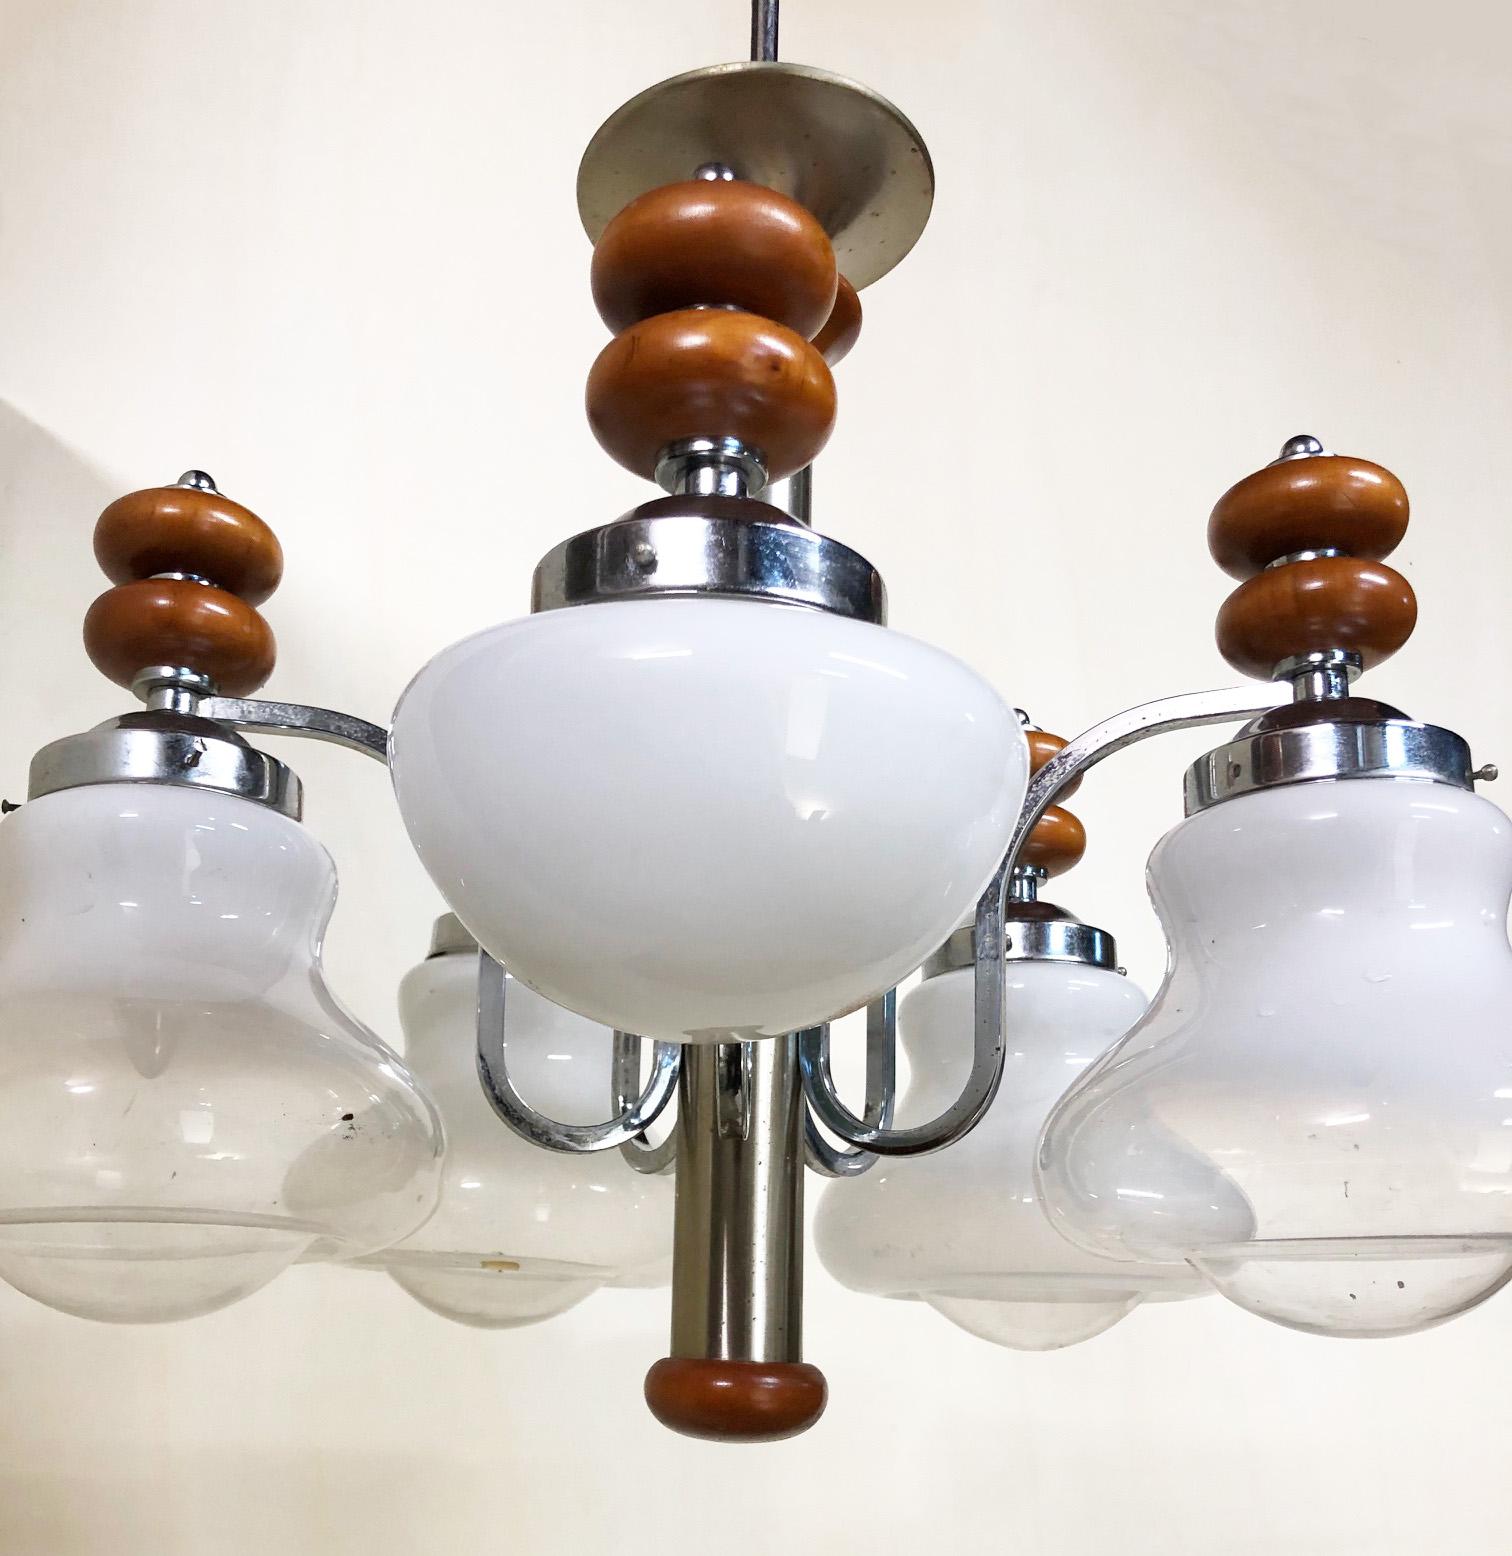 Original Italian Five-Light Chandelier from 1970 Chrome, Wood and Glass For Sale 4